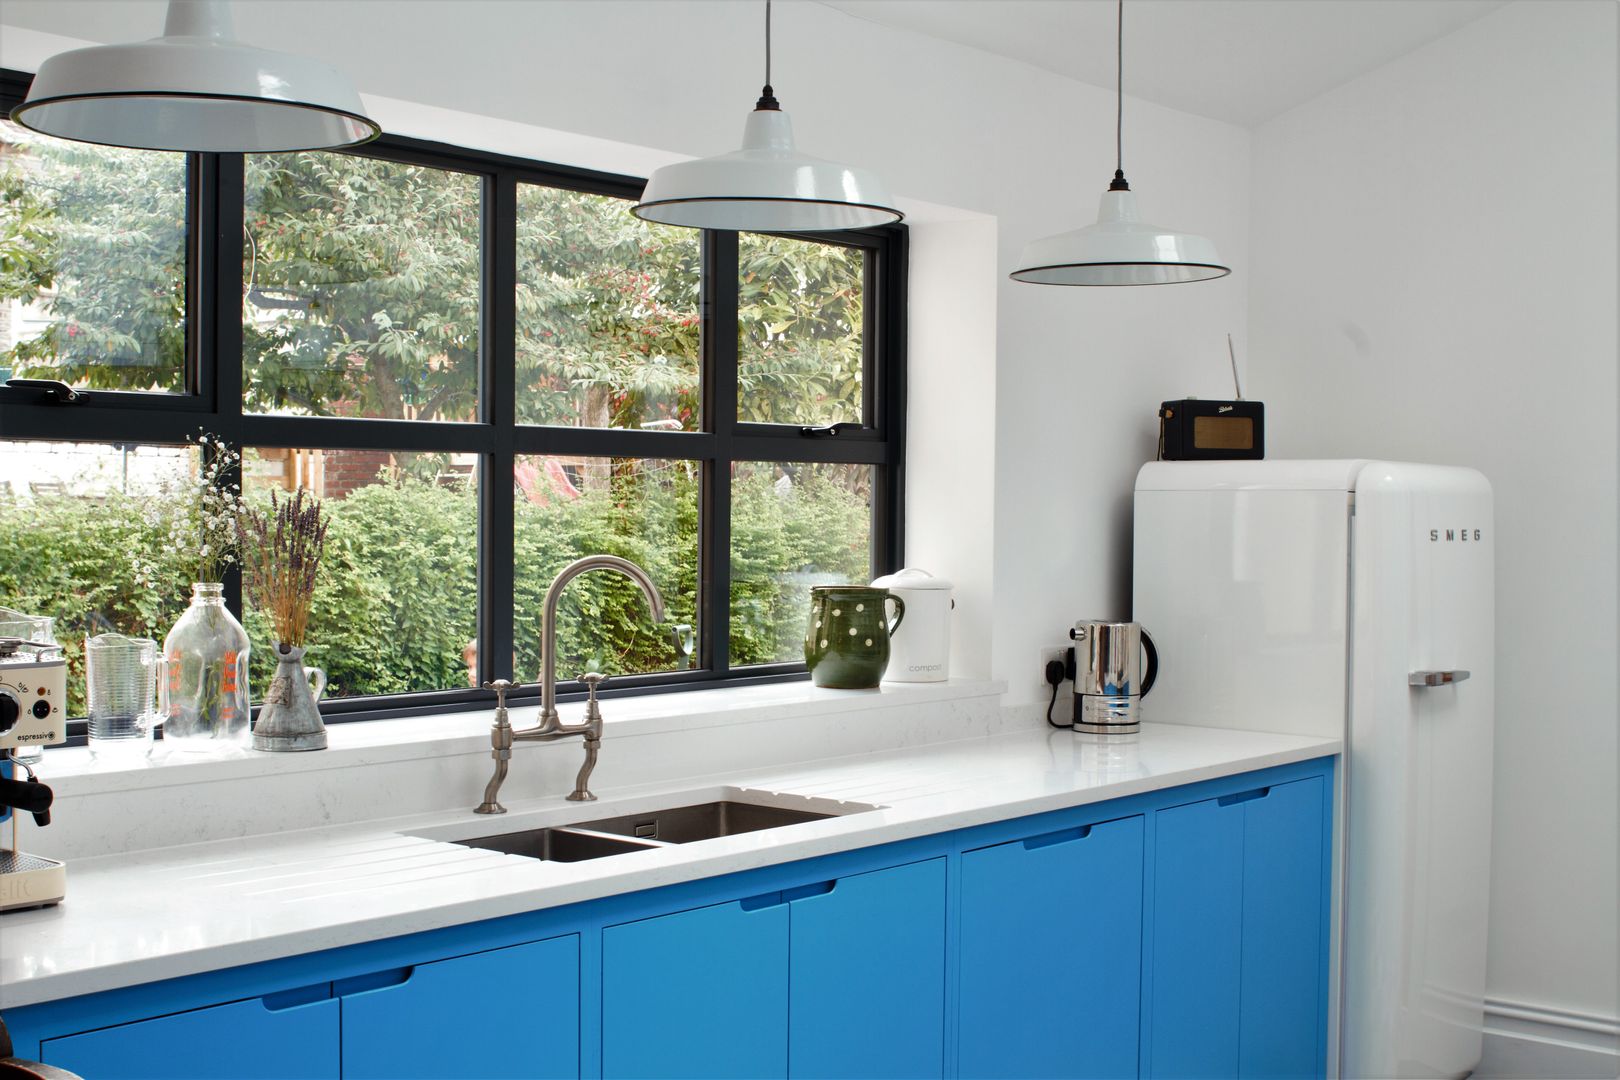 Industrial Kitchen With American Diner Feel homify Industrial style kitchen Solid Wood Multicolored flat panel,farrow & ball,st giles blue,bianco venato,smeg fridge,monobloc tap,clearwater stereo,windows,pendant light,industrial